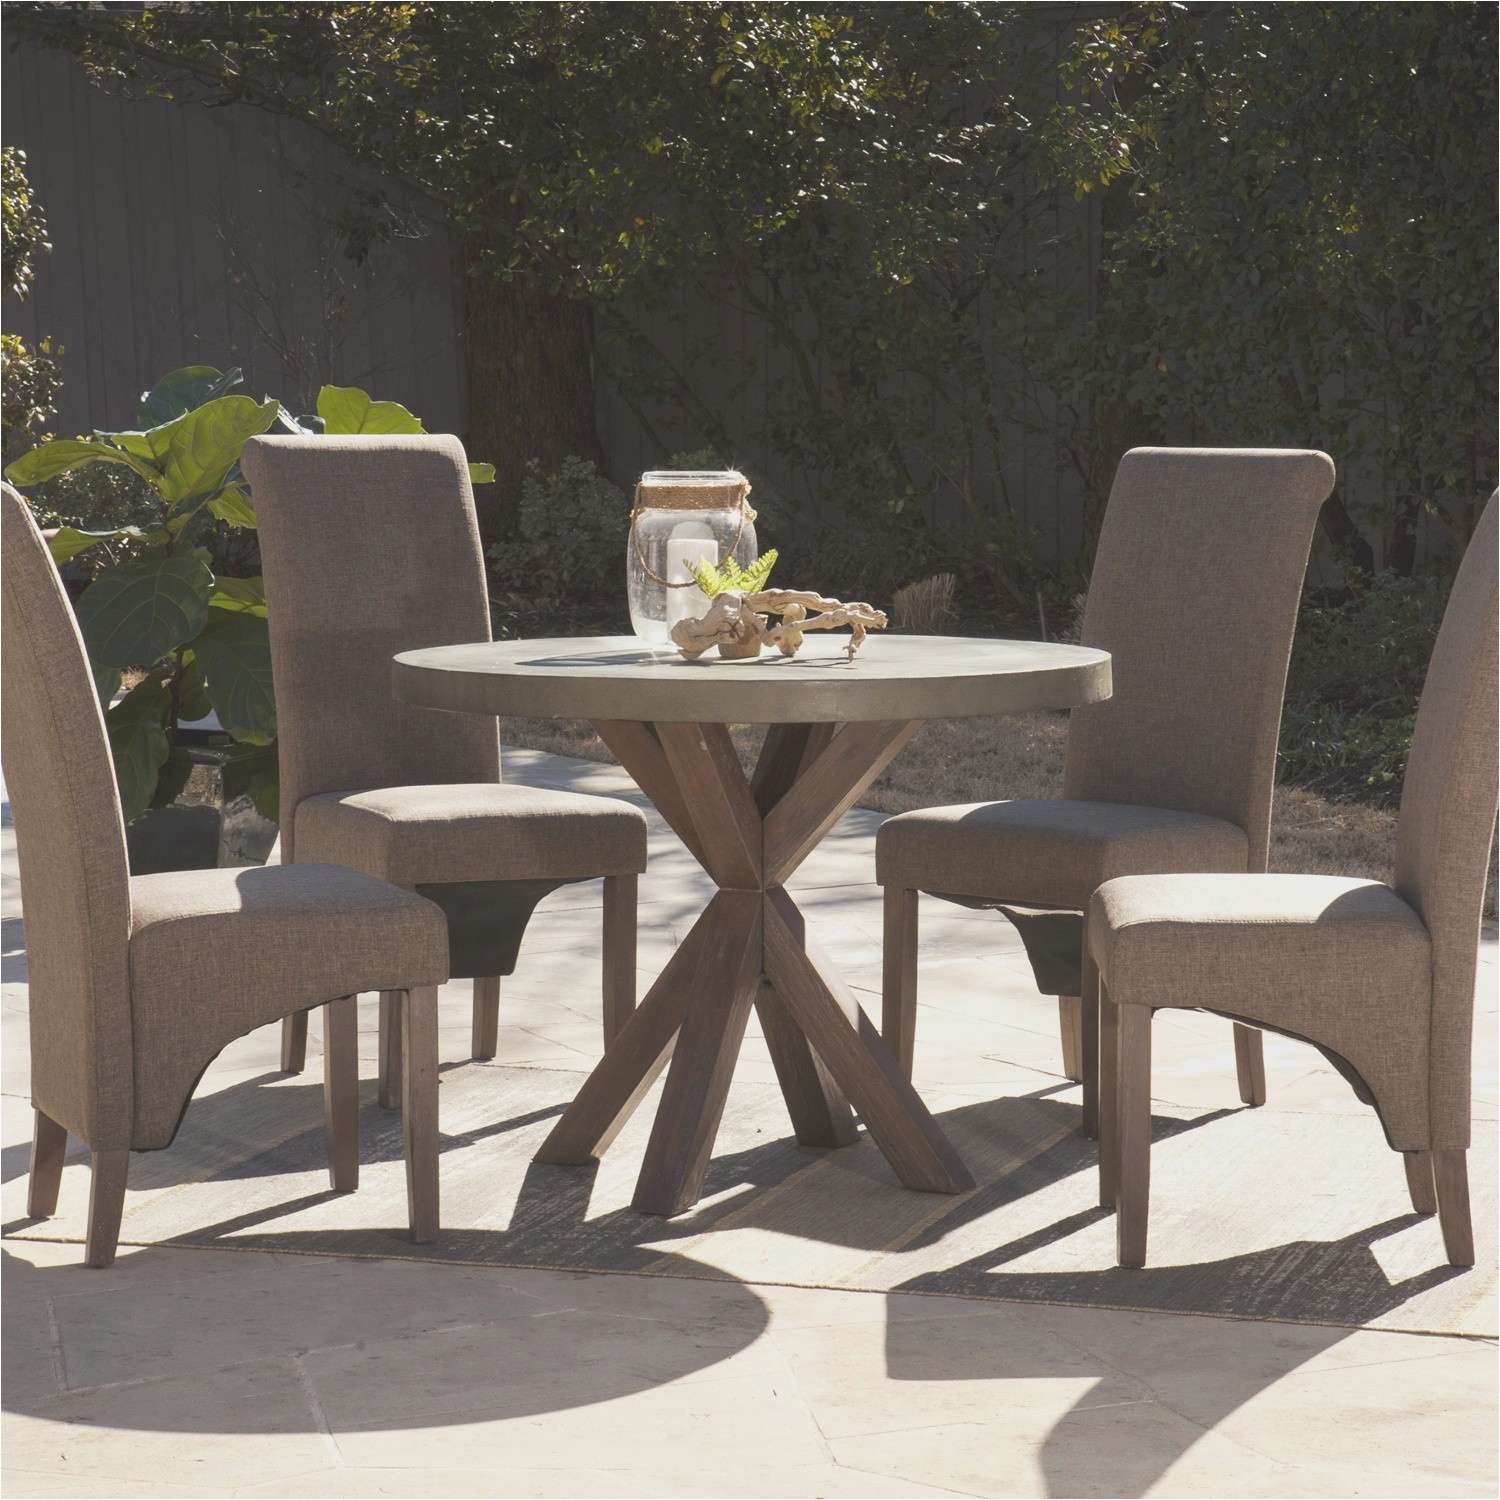 Df Patio Furniture Patio Furniture Dining Sets Unique Outdoor Table and Chairs Best